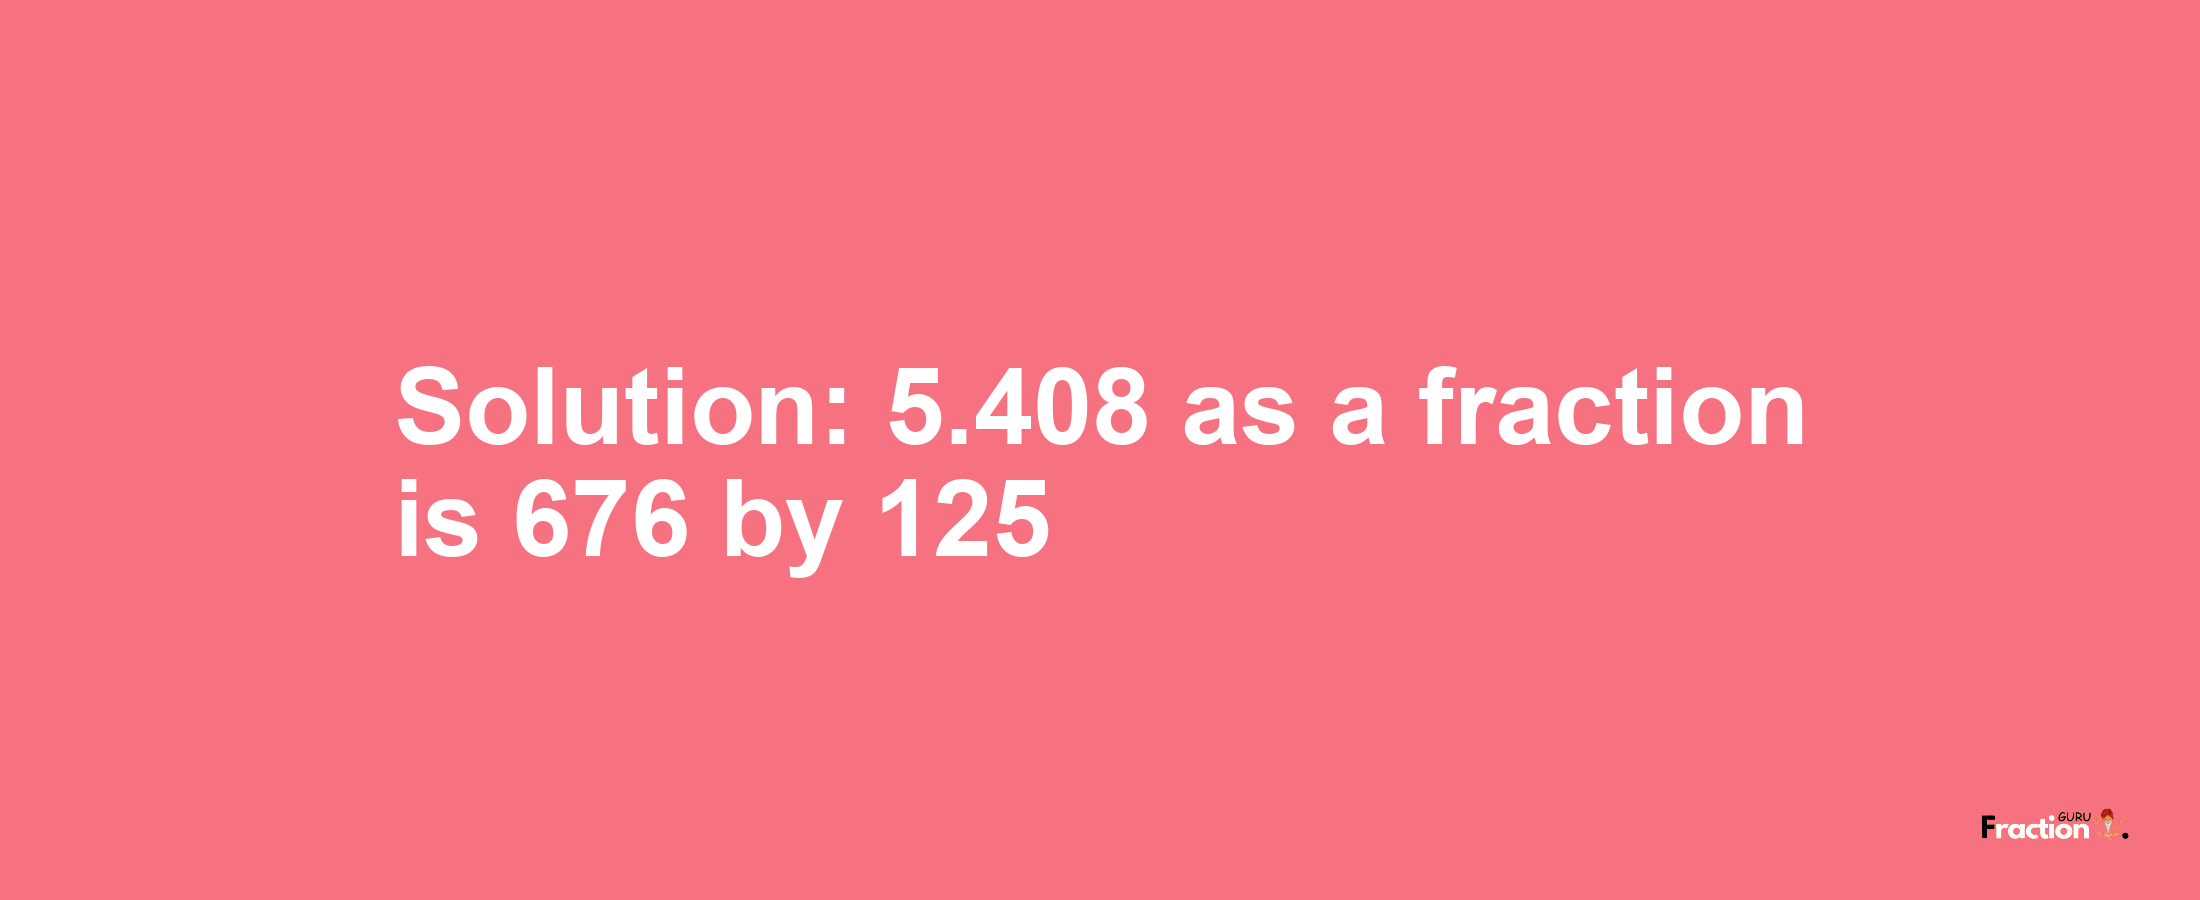 Solution:5.408 as a fraction is 676/125